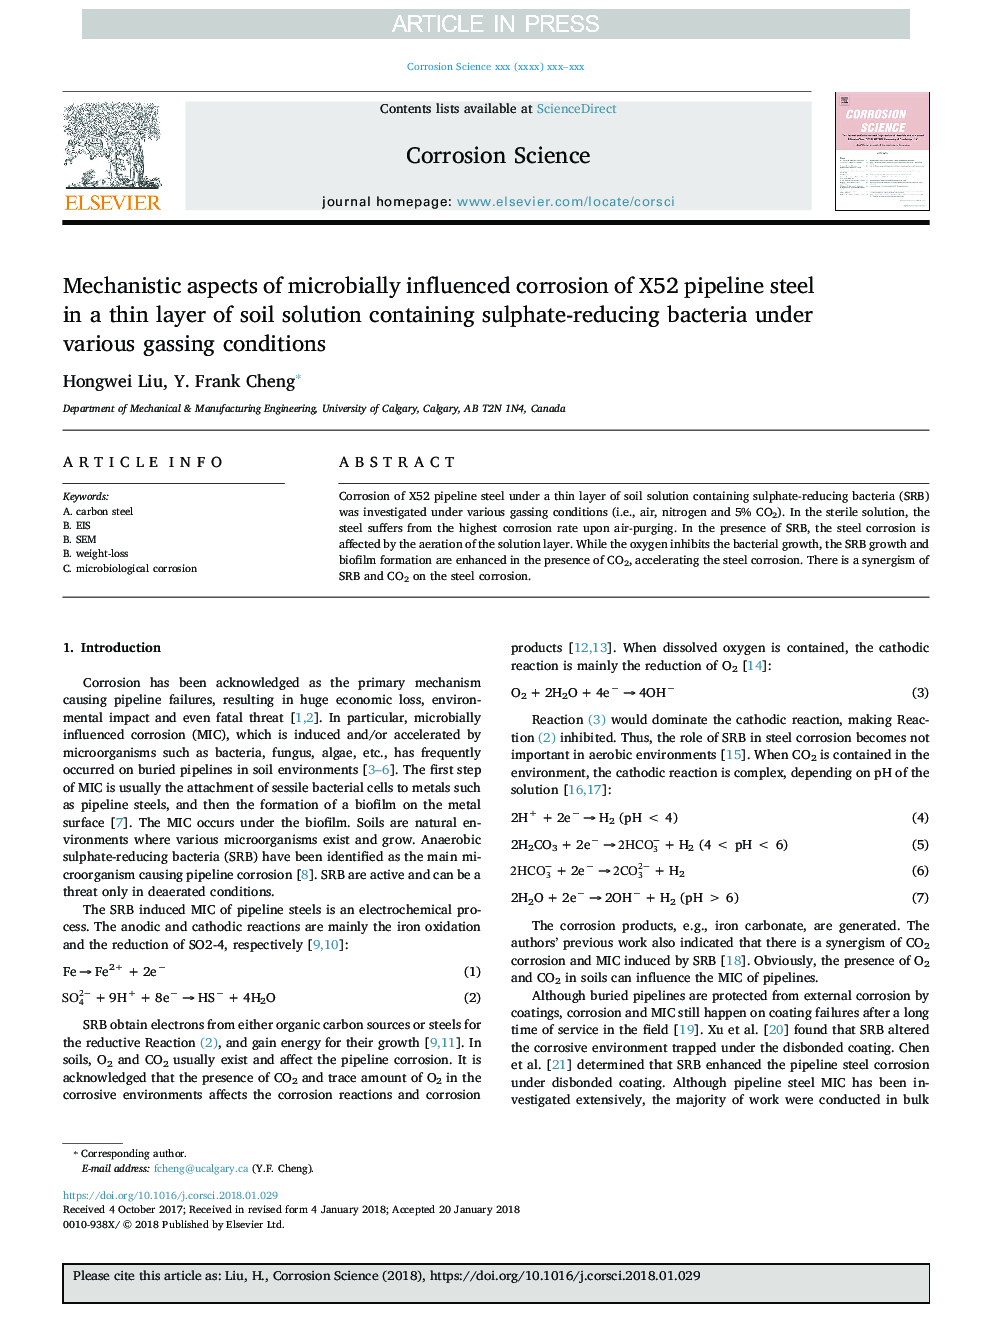 Mechanistic aspects of microbially influenced corrosion of X52 pipeline steel in a thin layer of soil solution containing sulphate-reducing bacteria under various gassing conditions